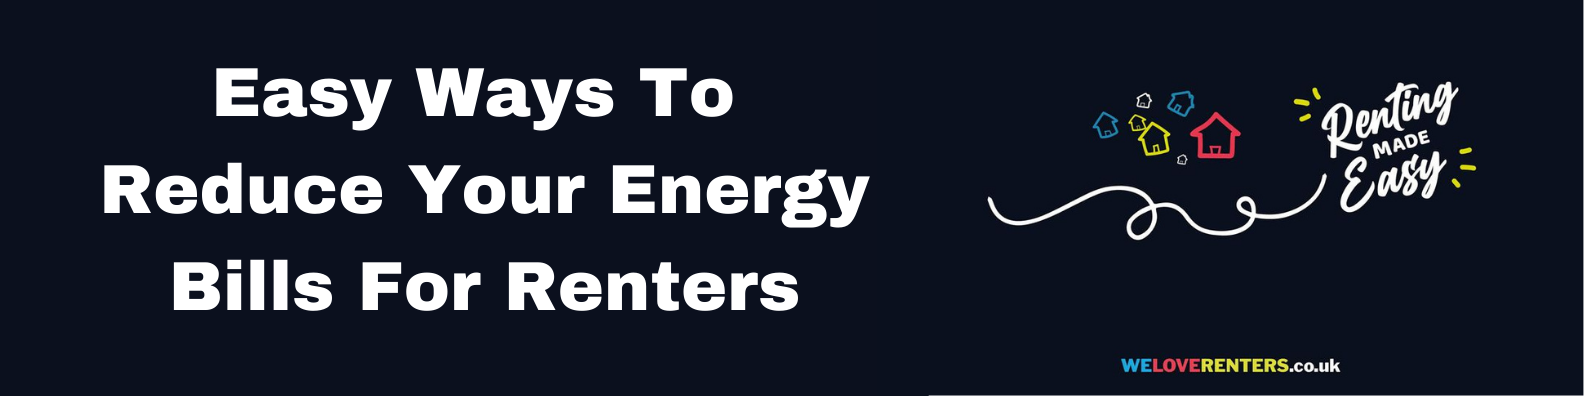 Easy Ways To Reduce Your Energy Bills For Renters